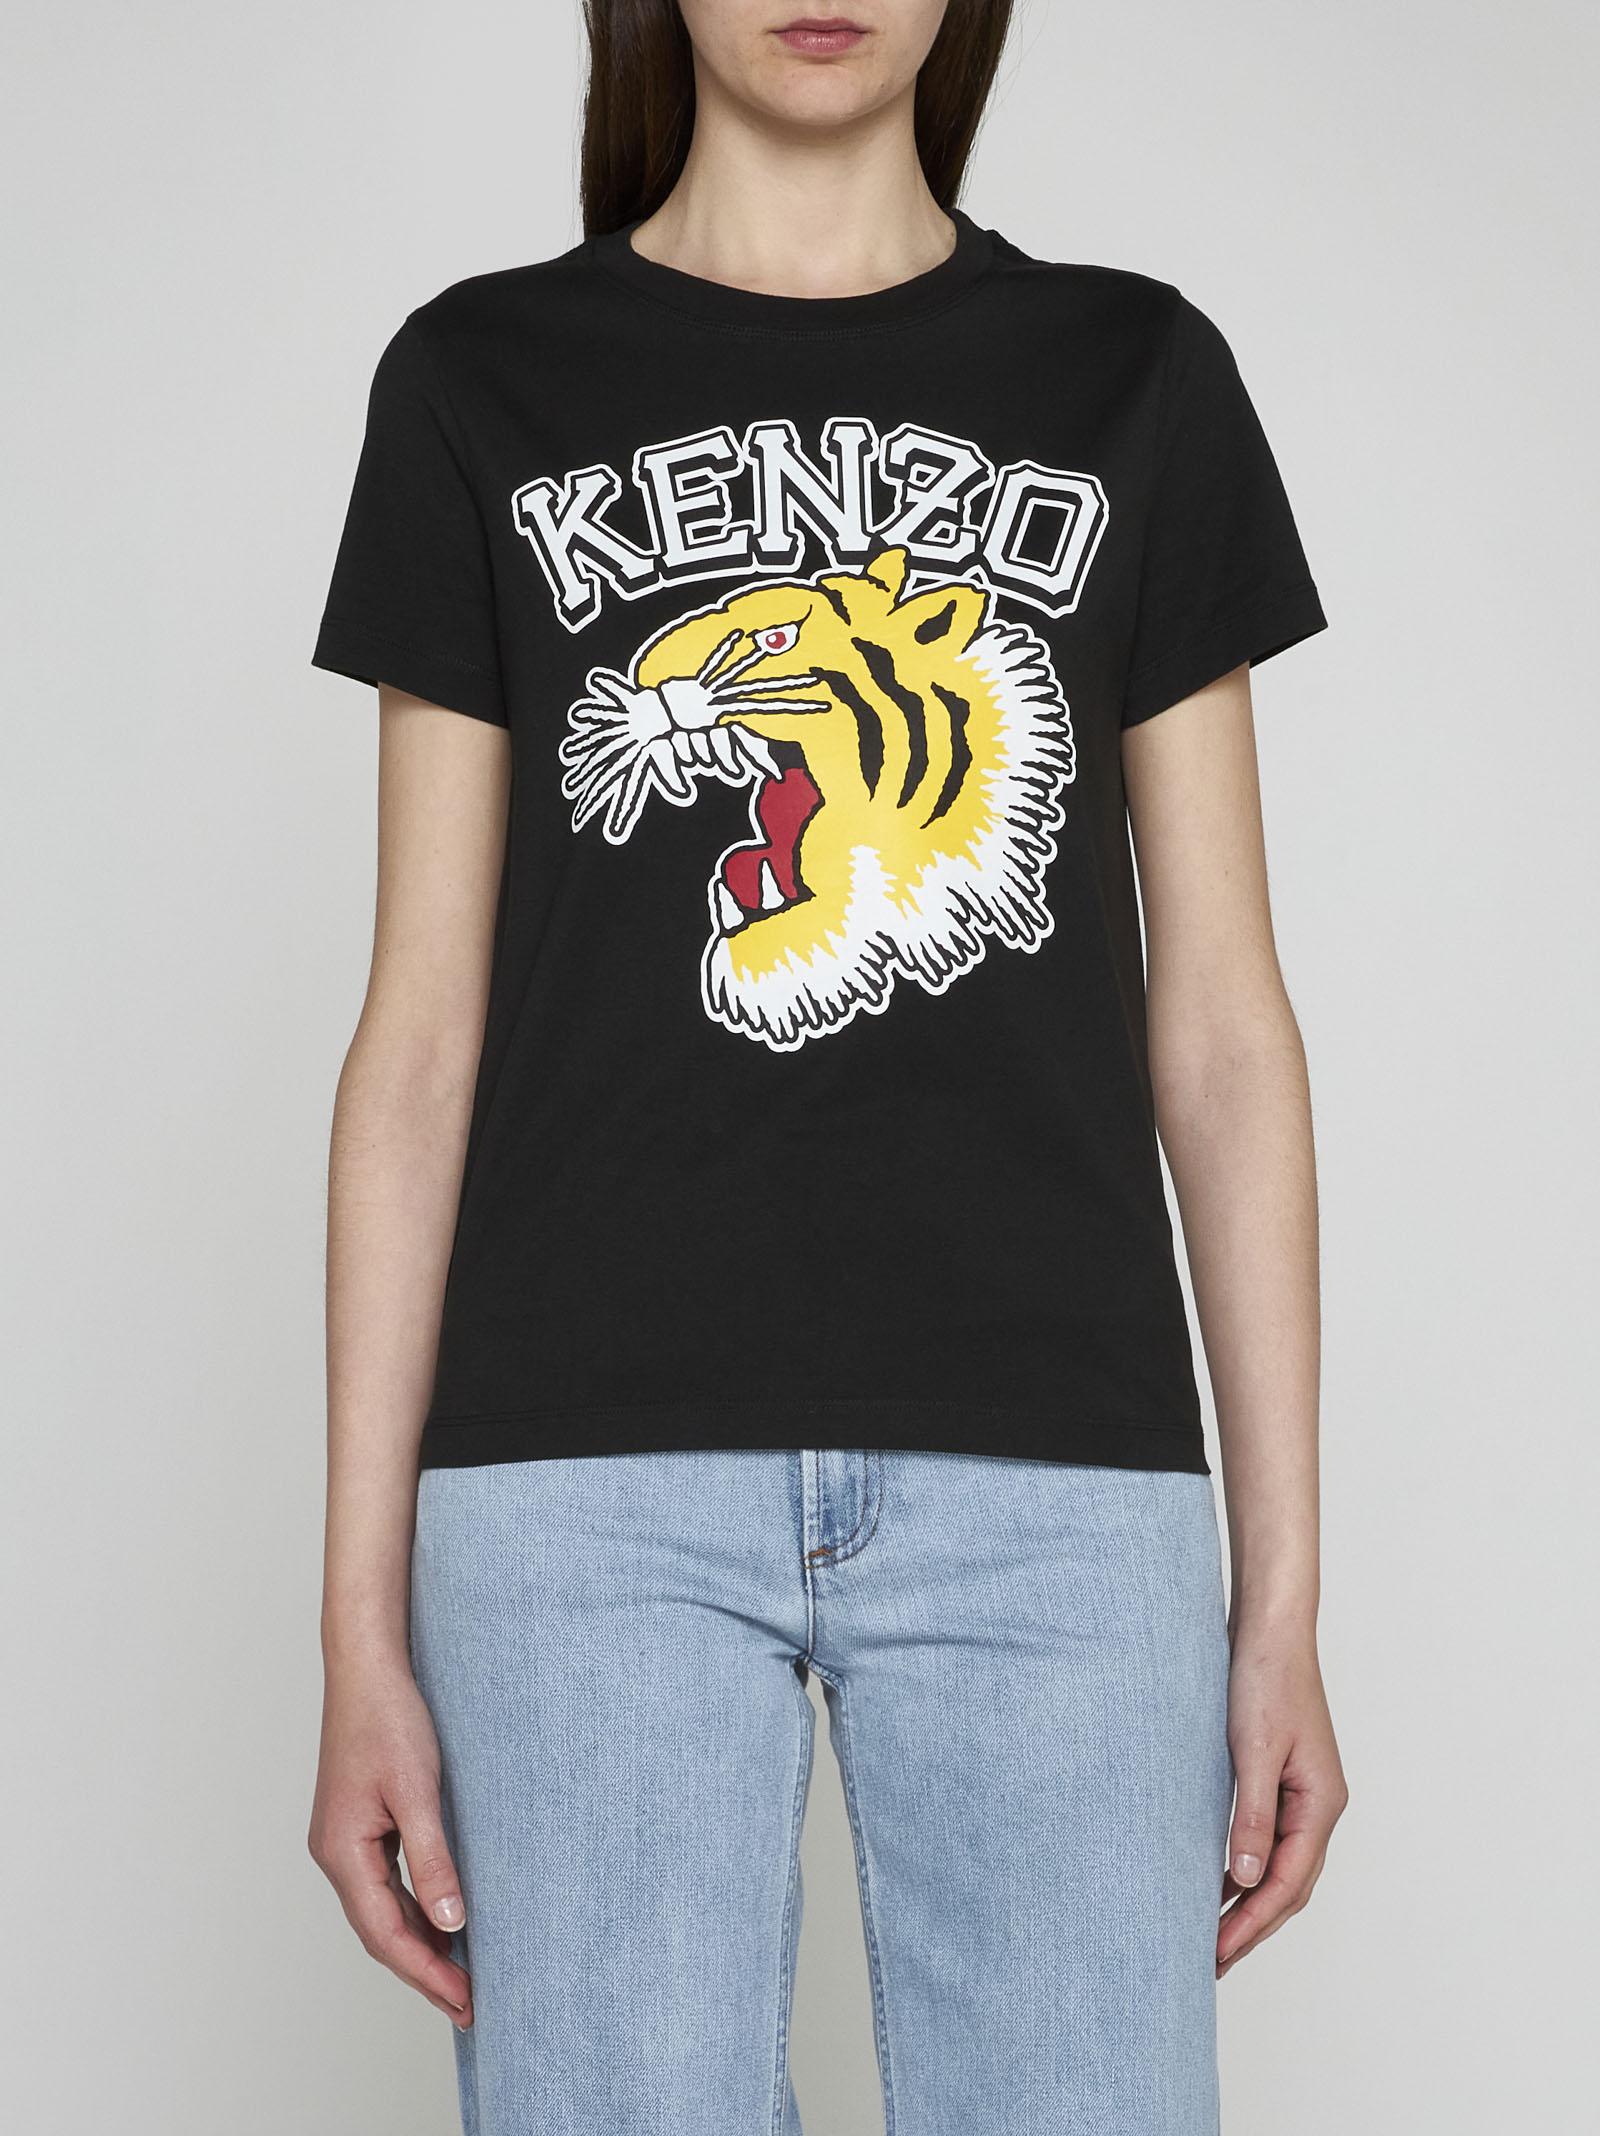 KENZO Tiger Cotton T-shirt in Black | Lyst